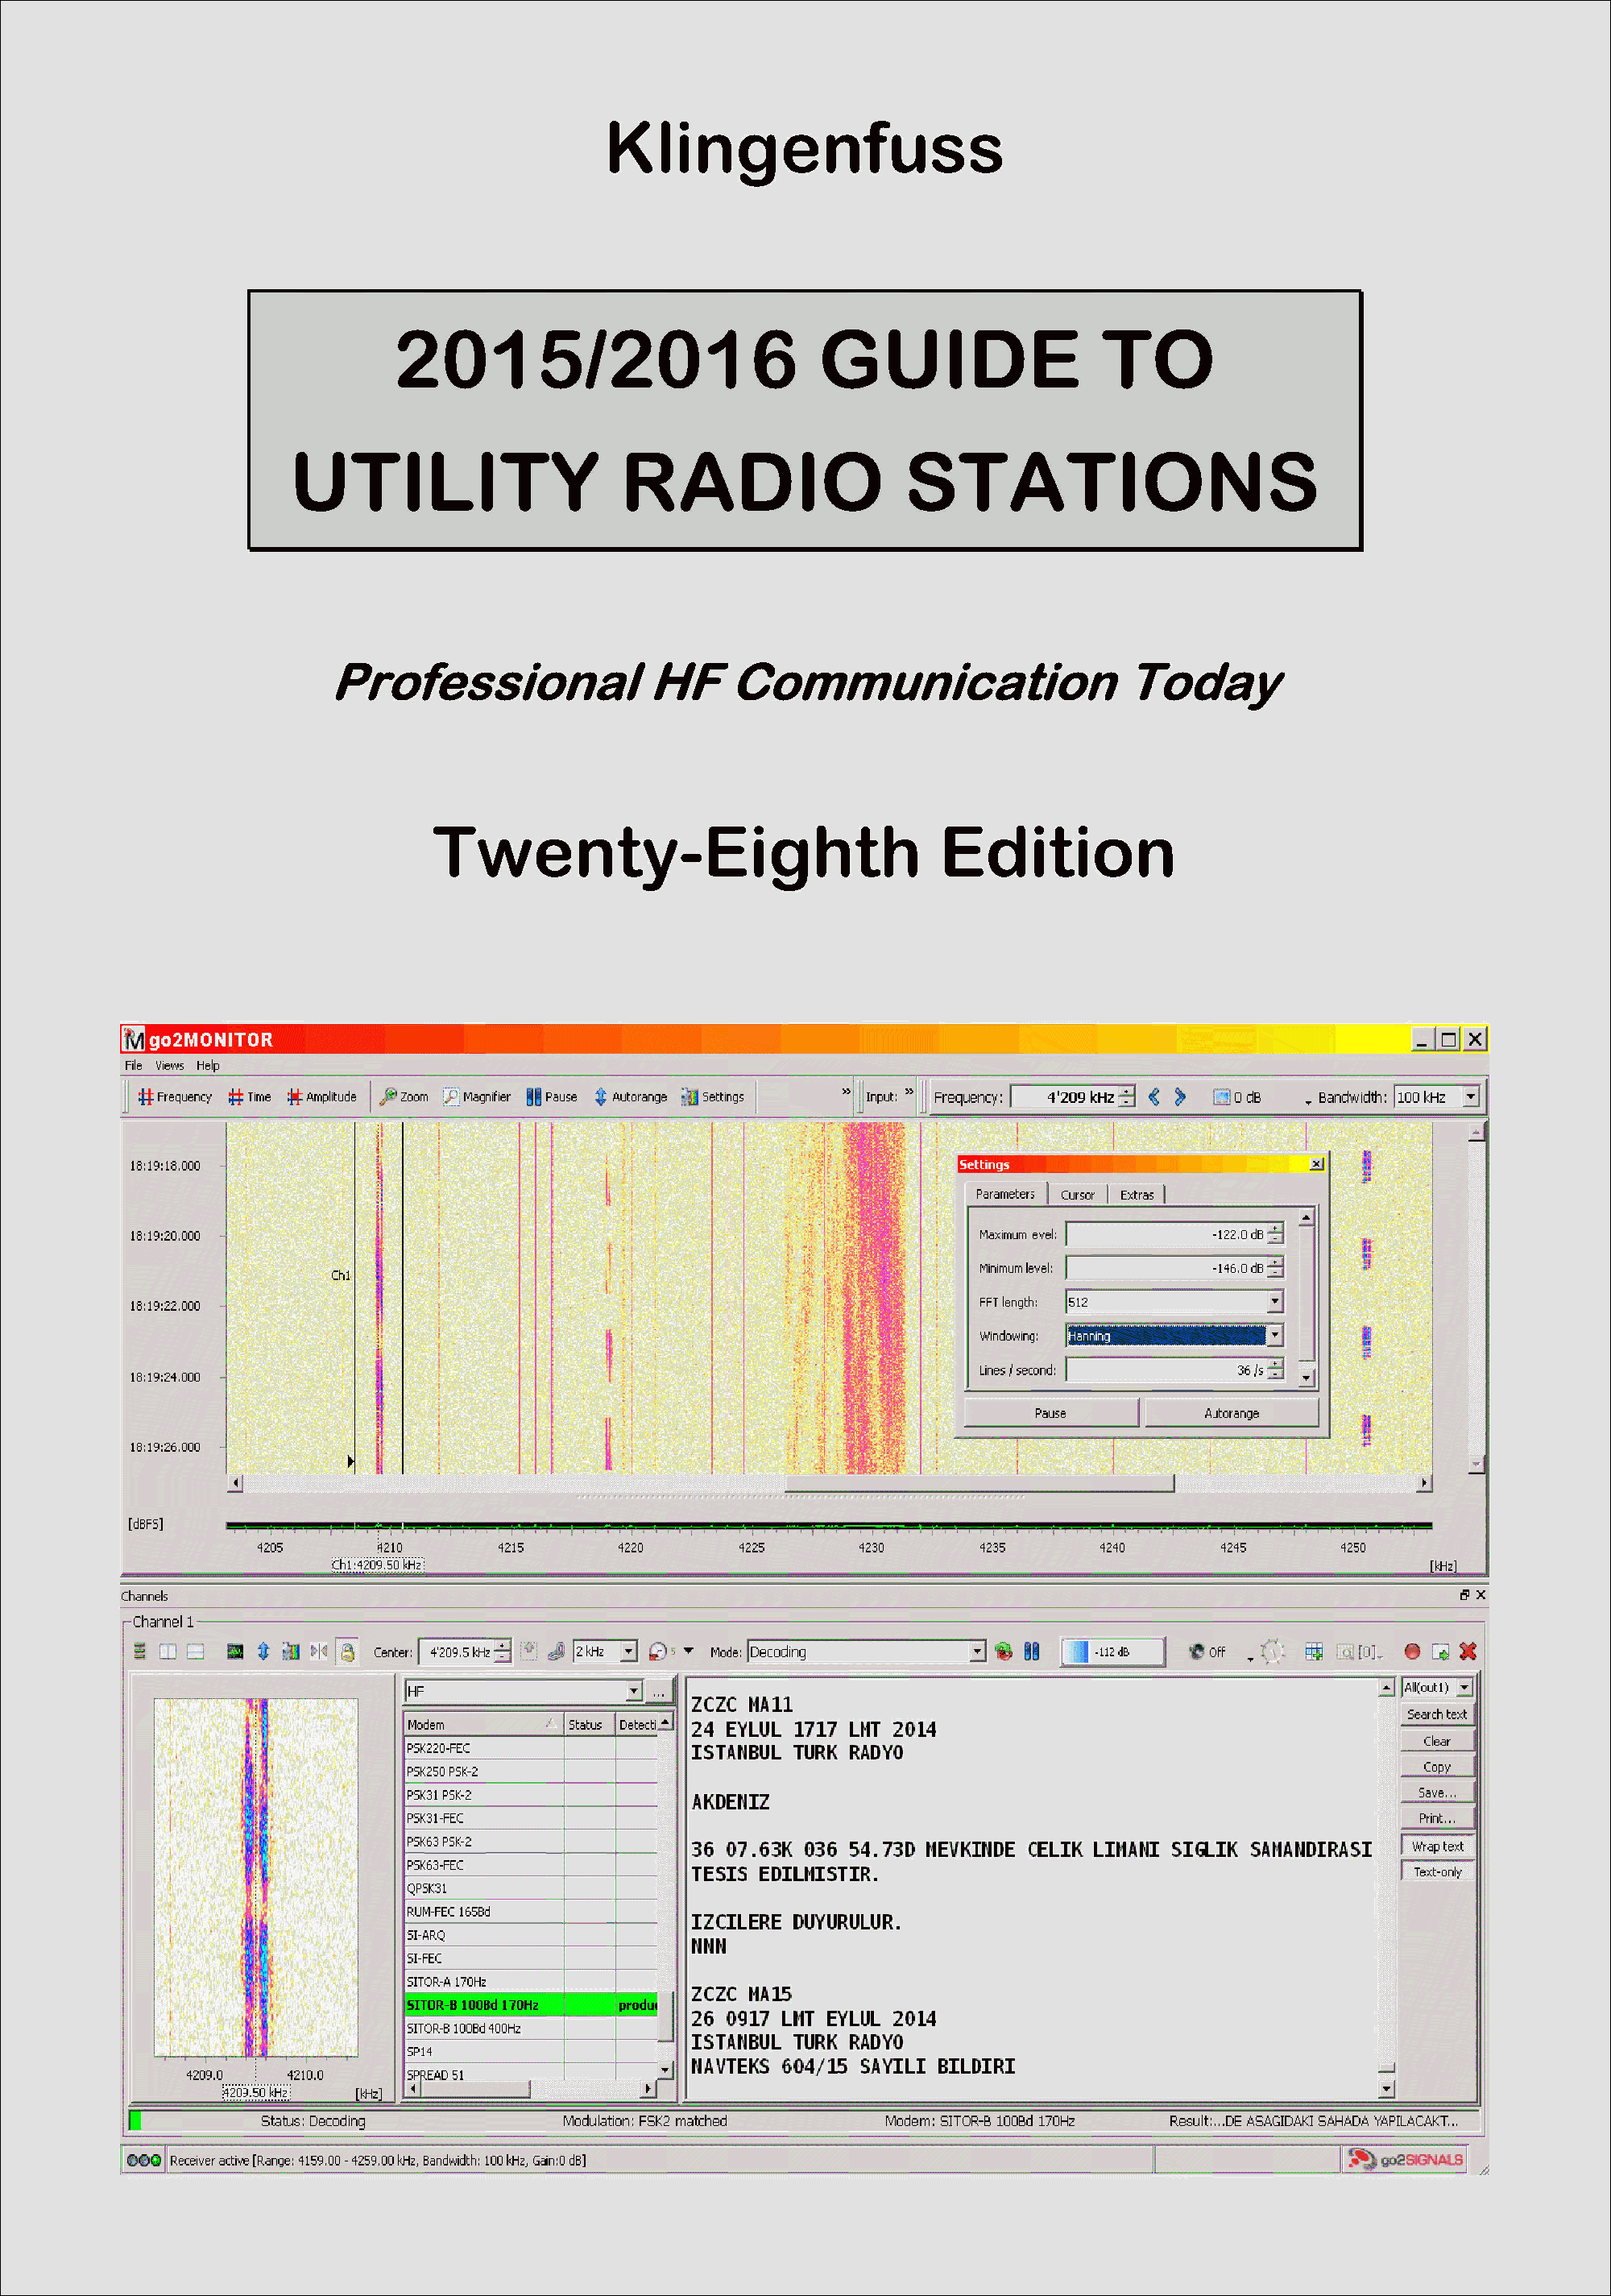 2015/2016 Guide to Utility Radio Stations